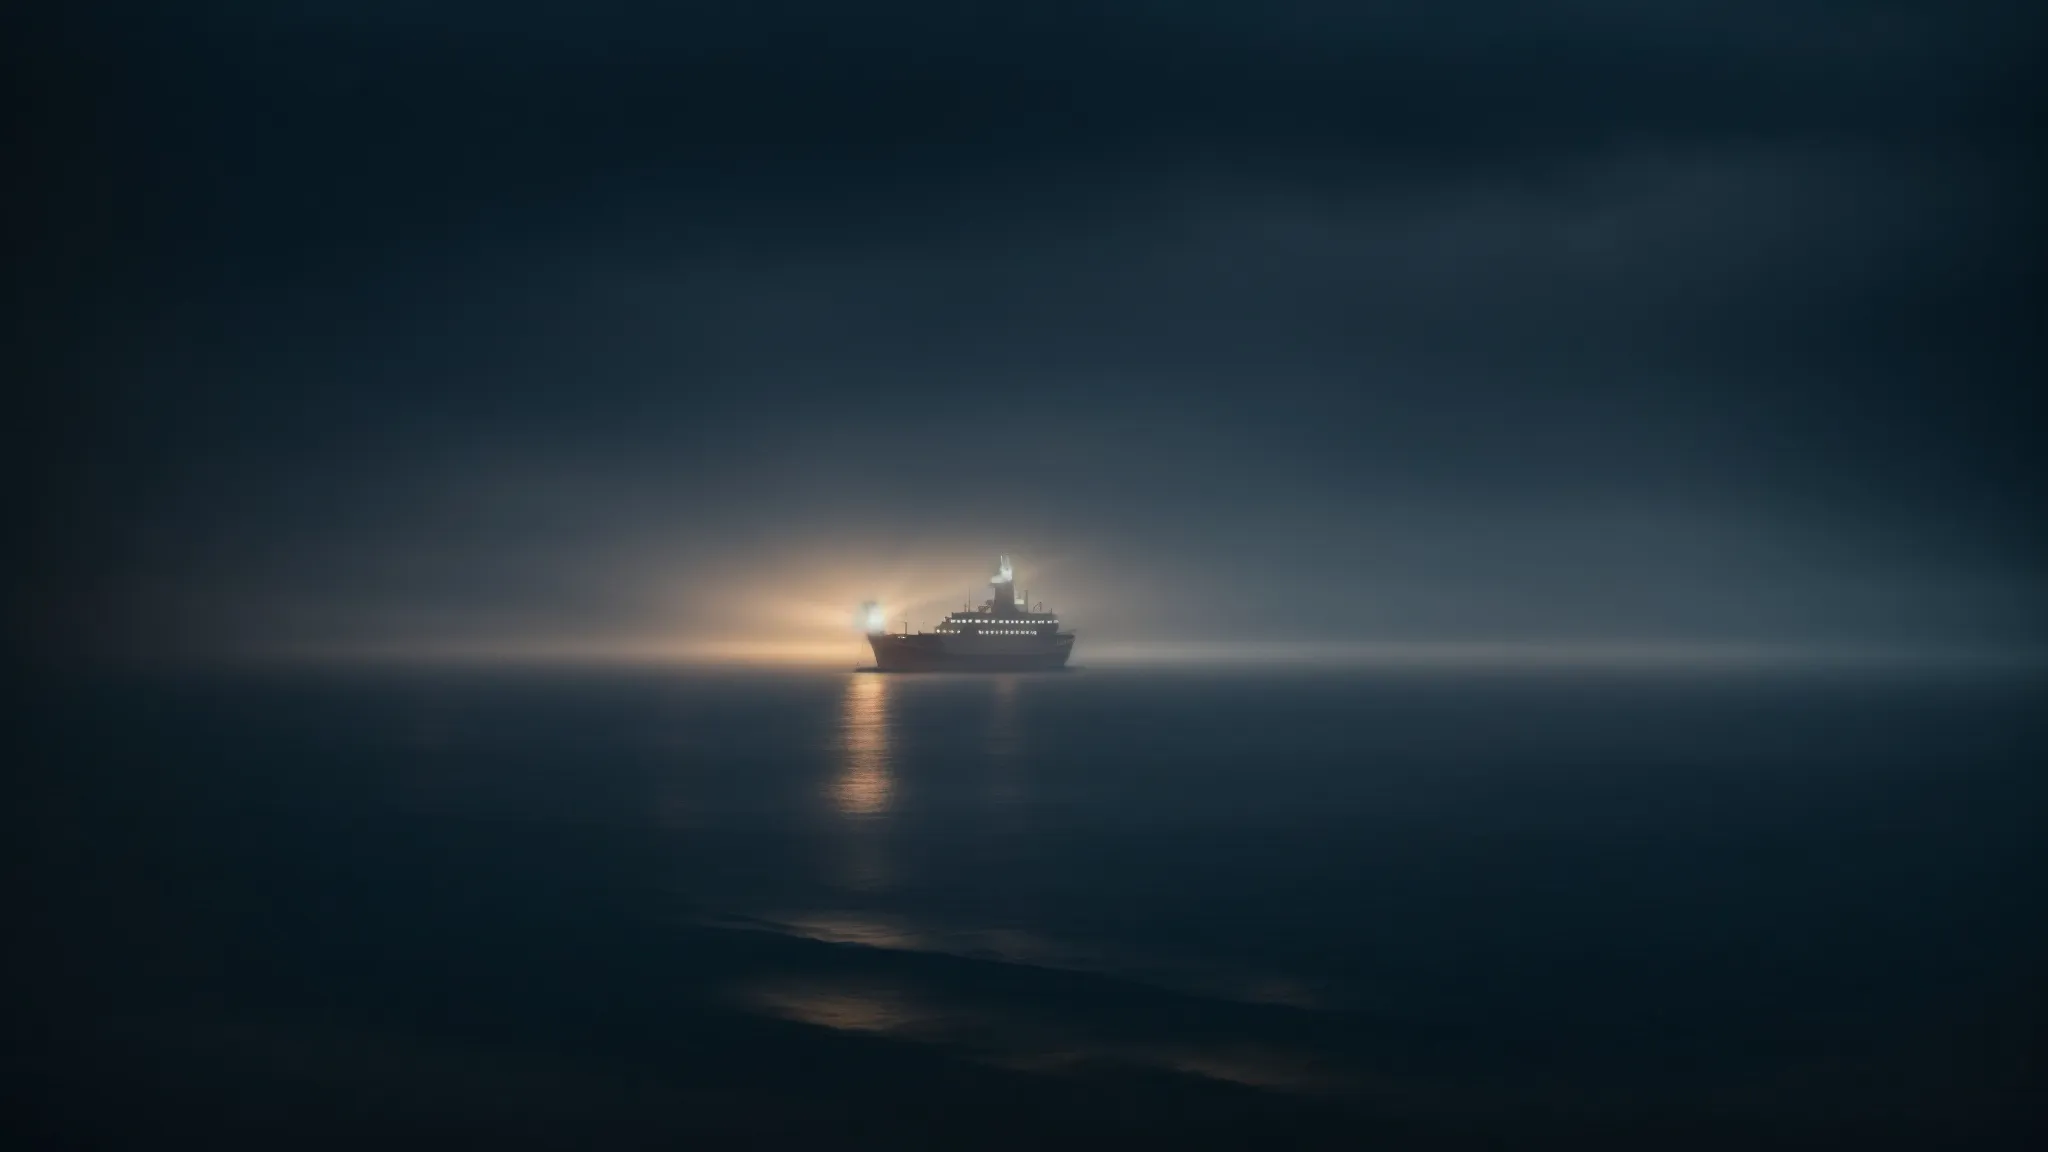 a ship navigates through a foggy sea at night, guided by a distant lighthouse's beam piercing the darkness.